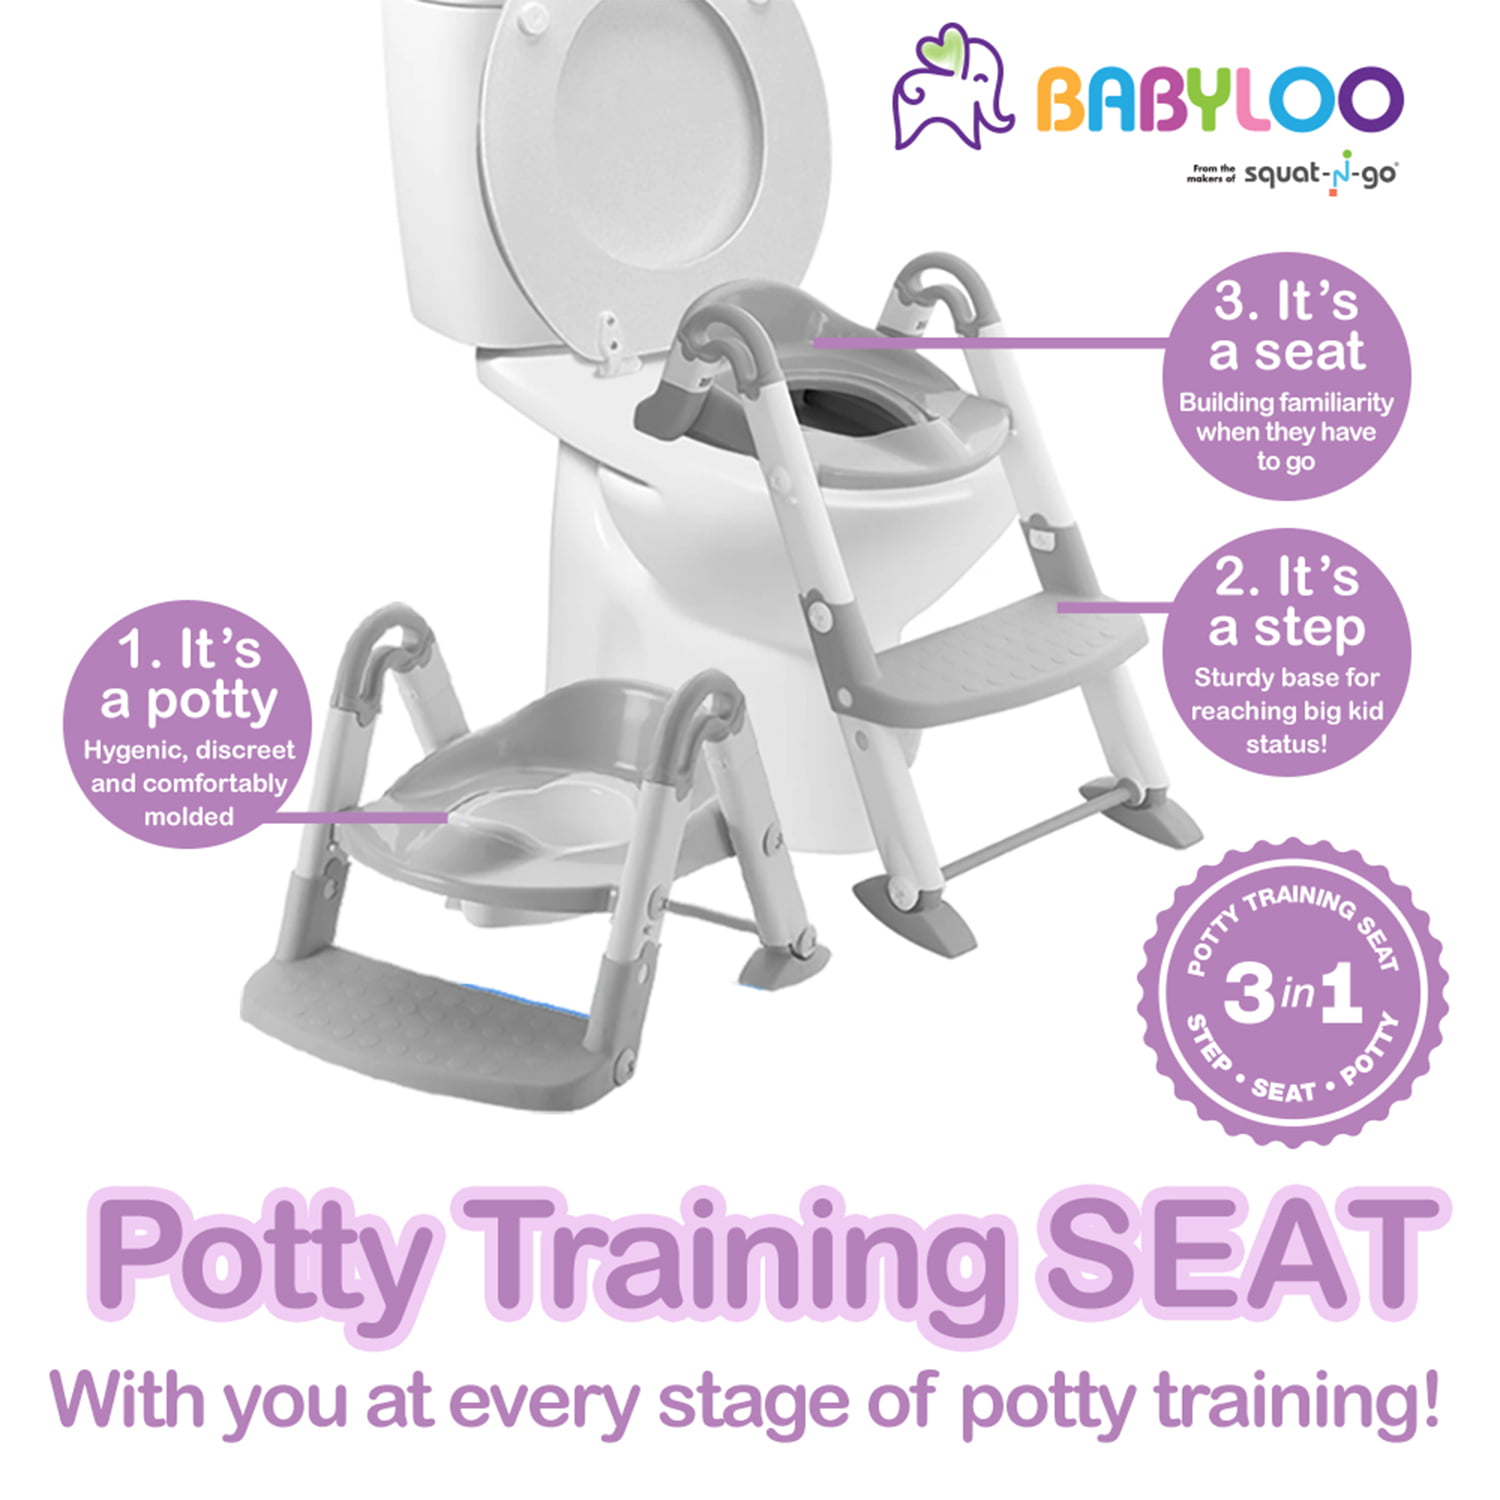 Gray Babyloo Bambino Booster 3 in 1 Convertible Potty Trainer for All Stages Ages 1-4 Collapsible Toilet Training Step Stool assists Your Toddler to go While They Grow 